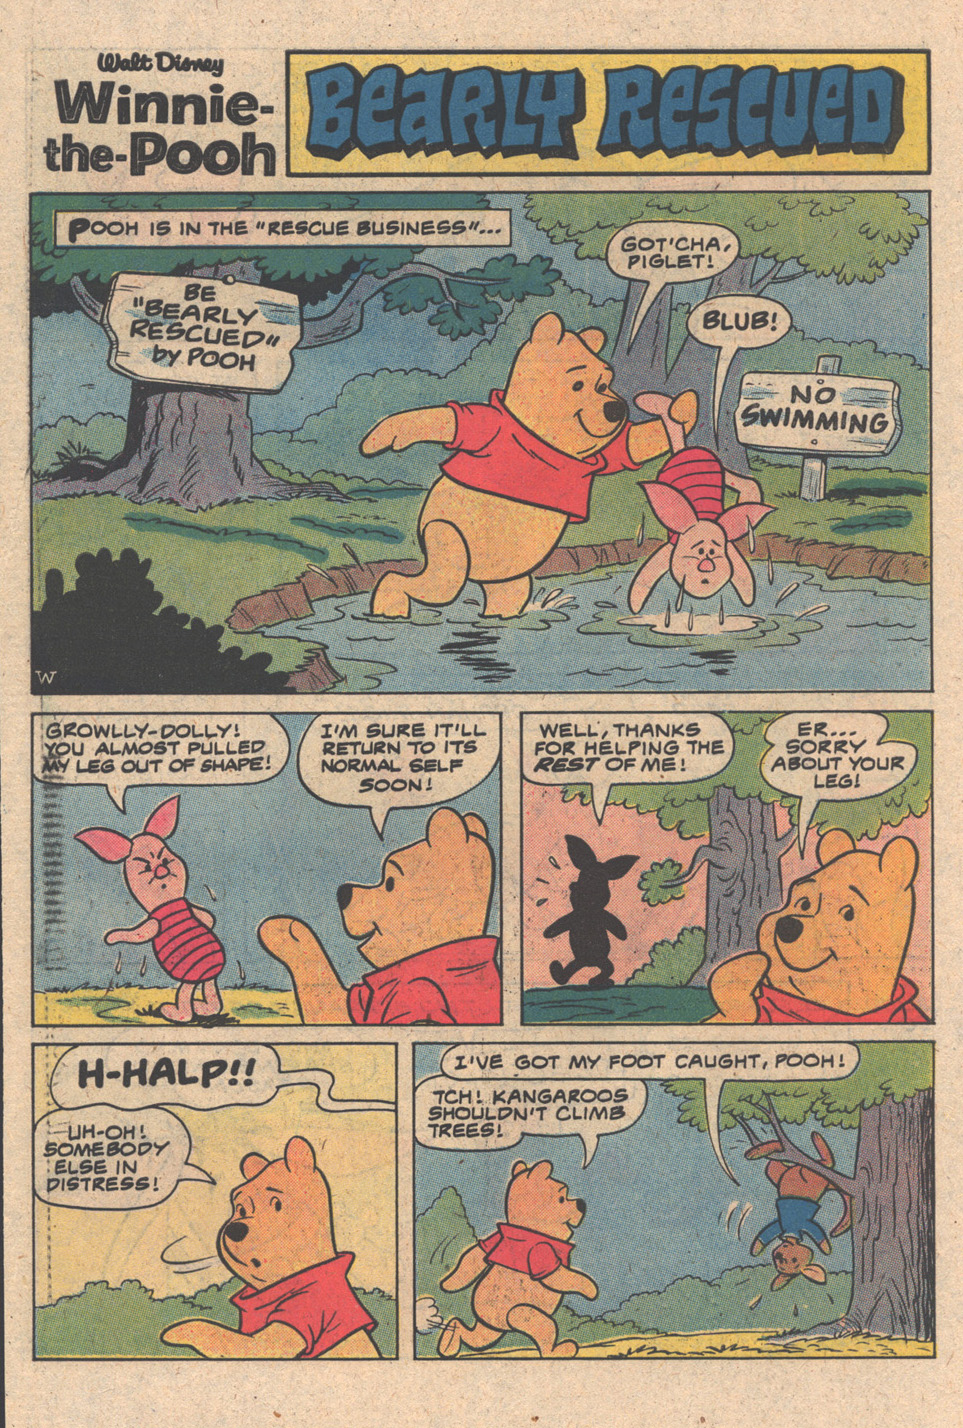 Read online Winnie-the-Pooh comic -  Issue #17 - 30